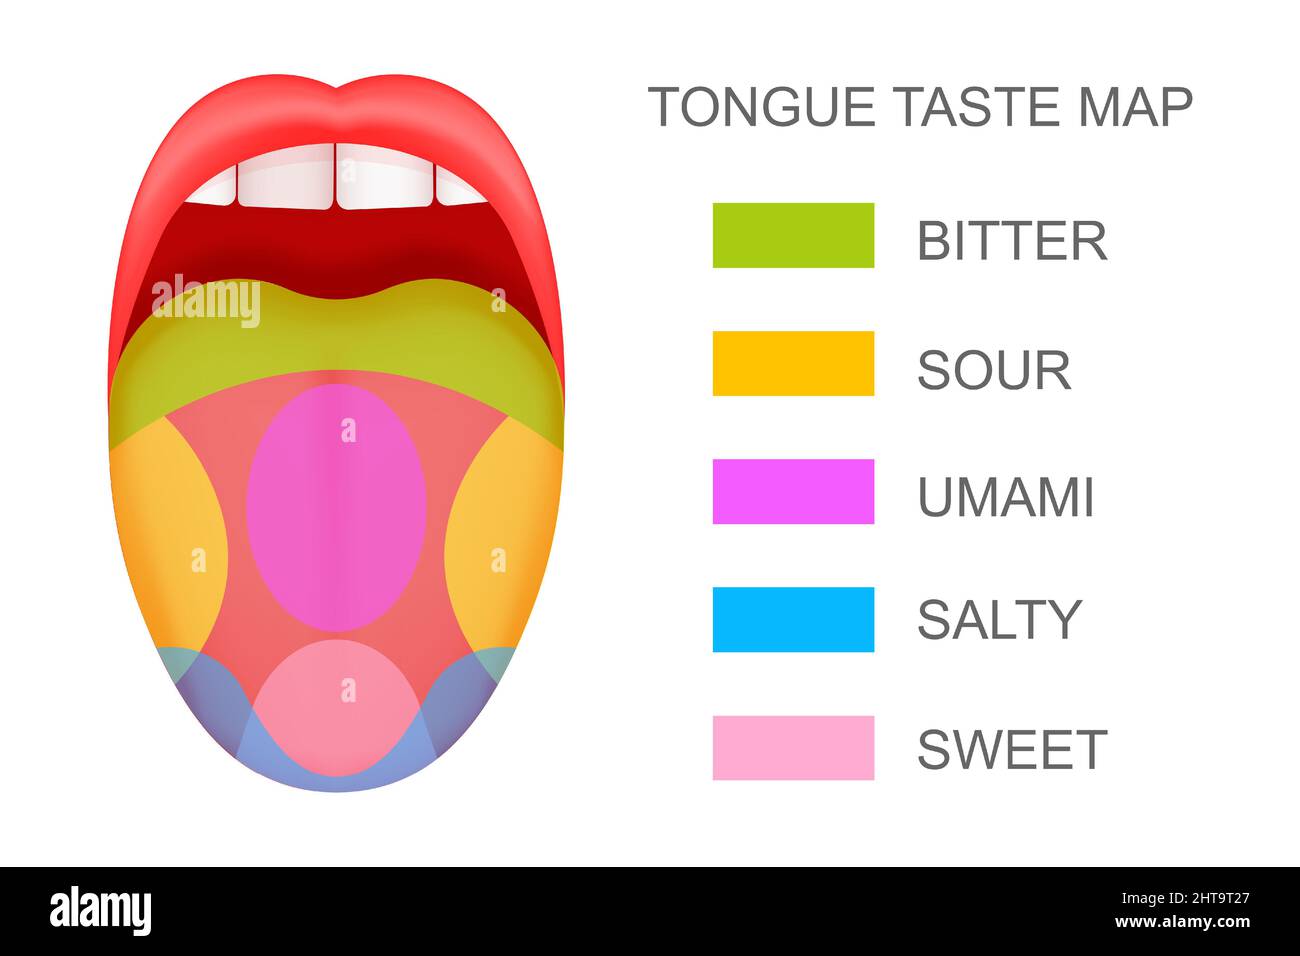 Tongue With Taste Receptors Map Sticking Out From Open Mouth Five Flavor Zones Pseudoscientific Theory Of Human Taste Buds Vector Cartoon Illustration 2HT9T27 